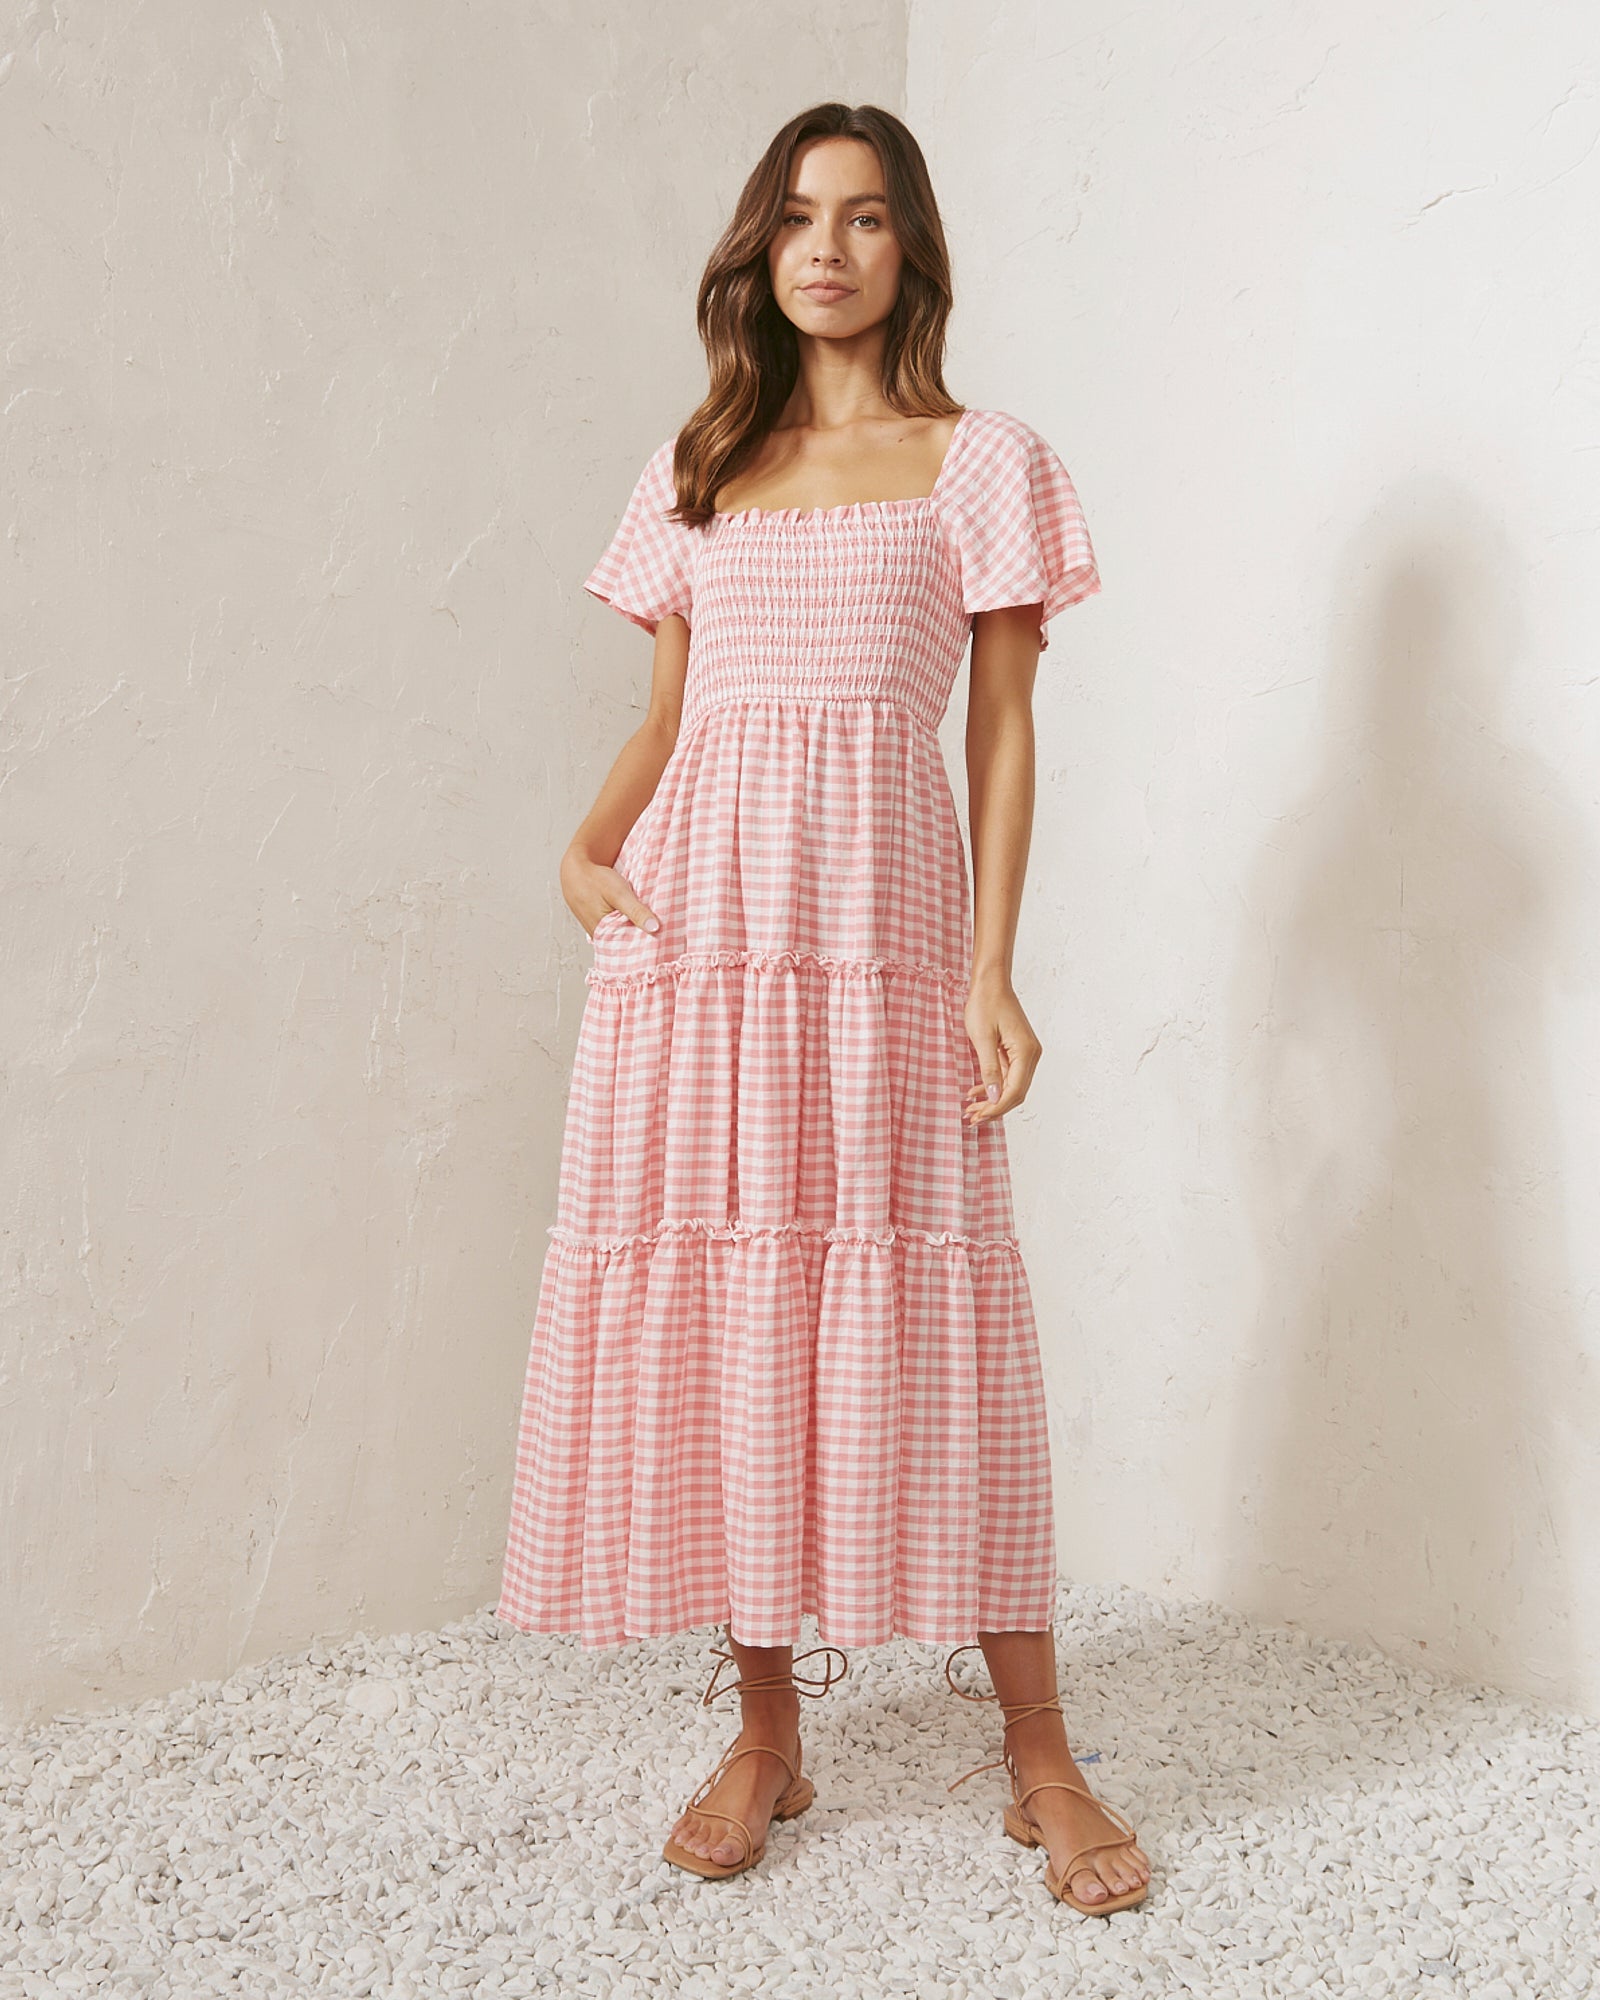 How To Wear A Gingham Dress?